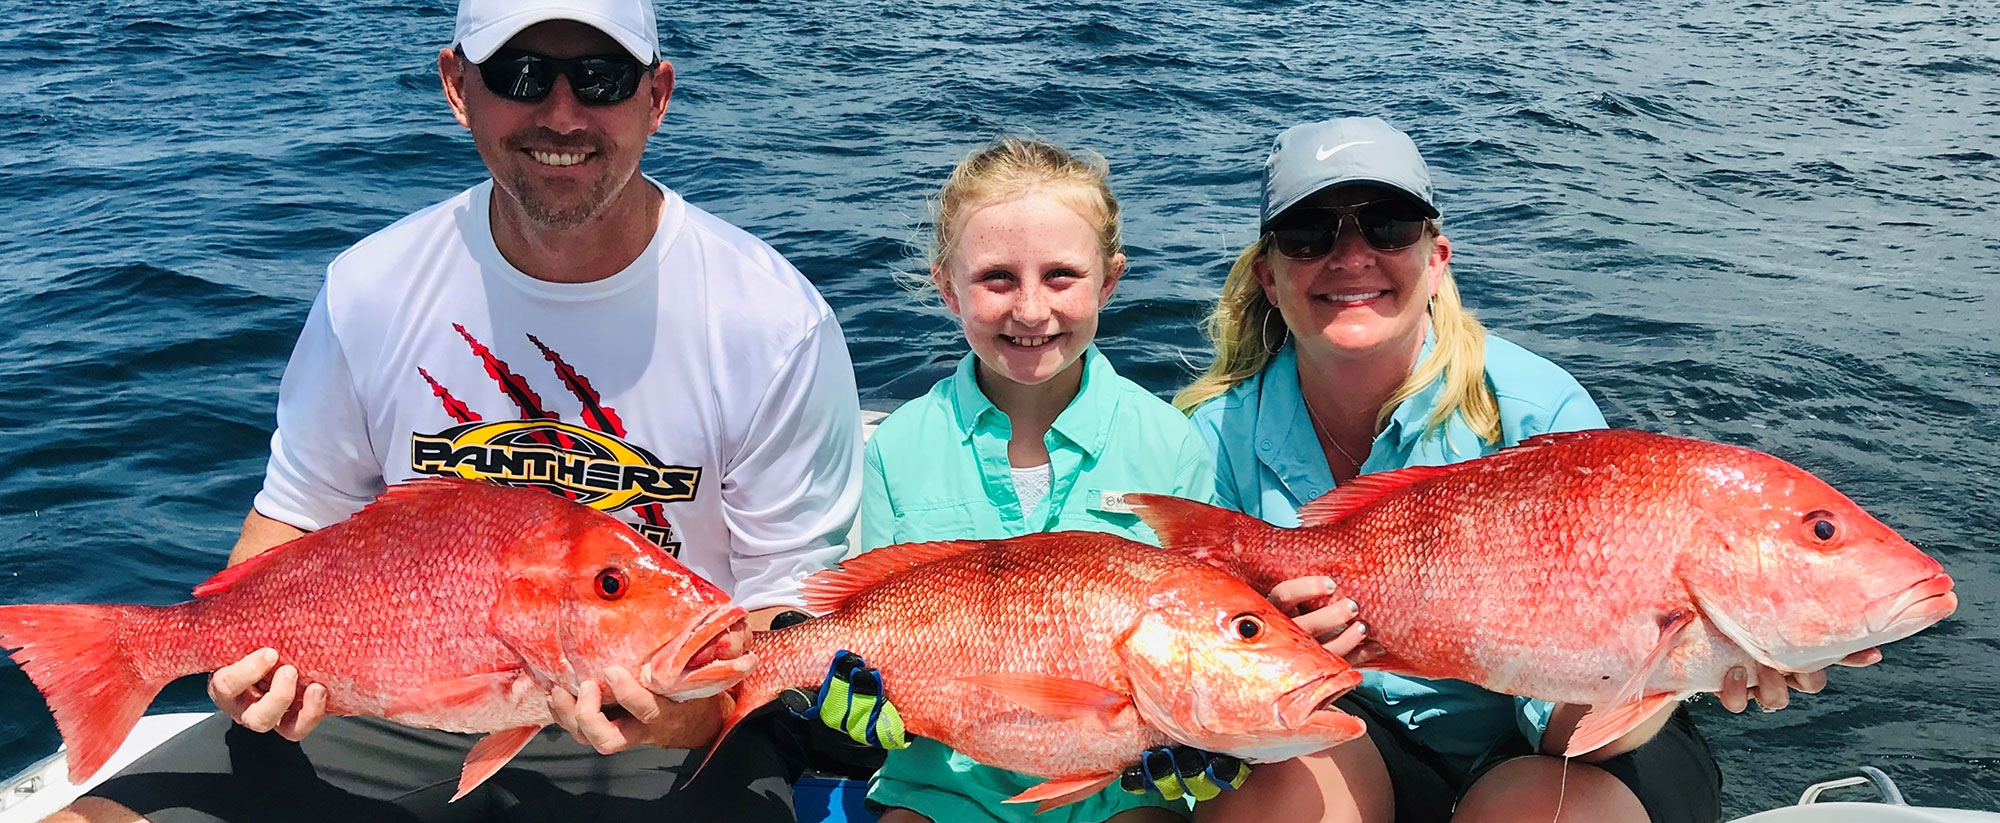 PCB Boat Adventure Tours - Family Fishing Together